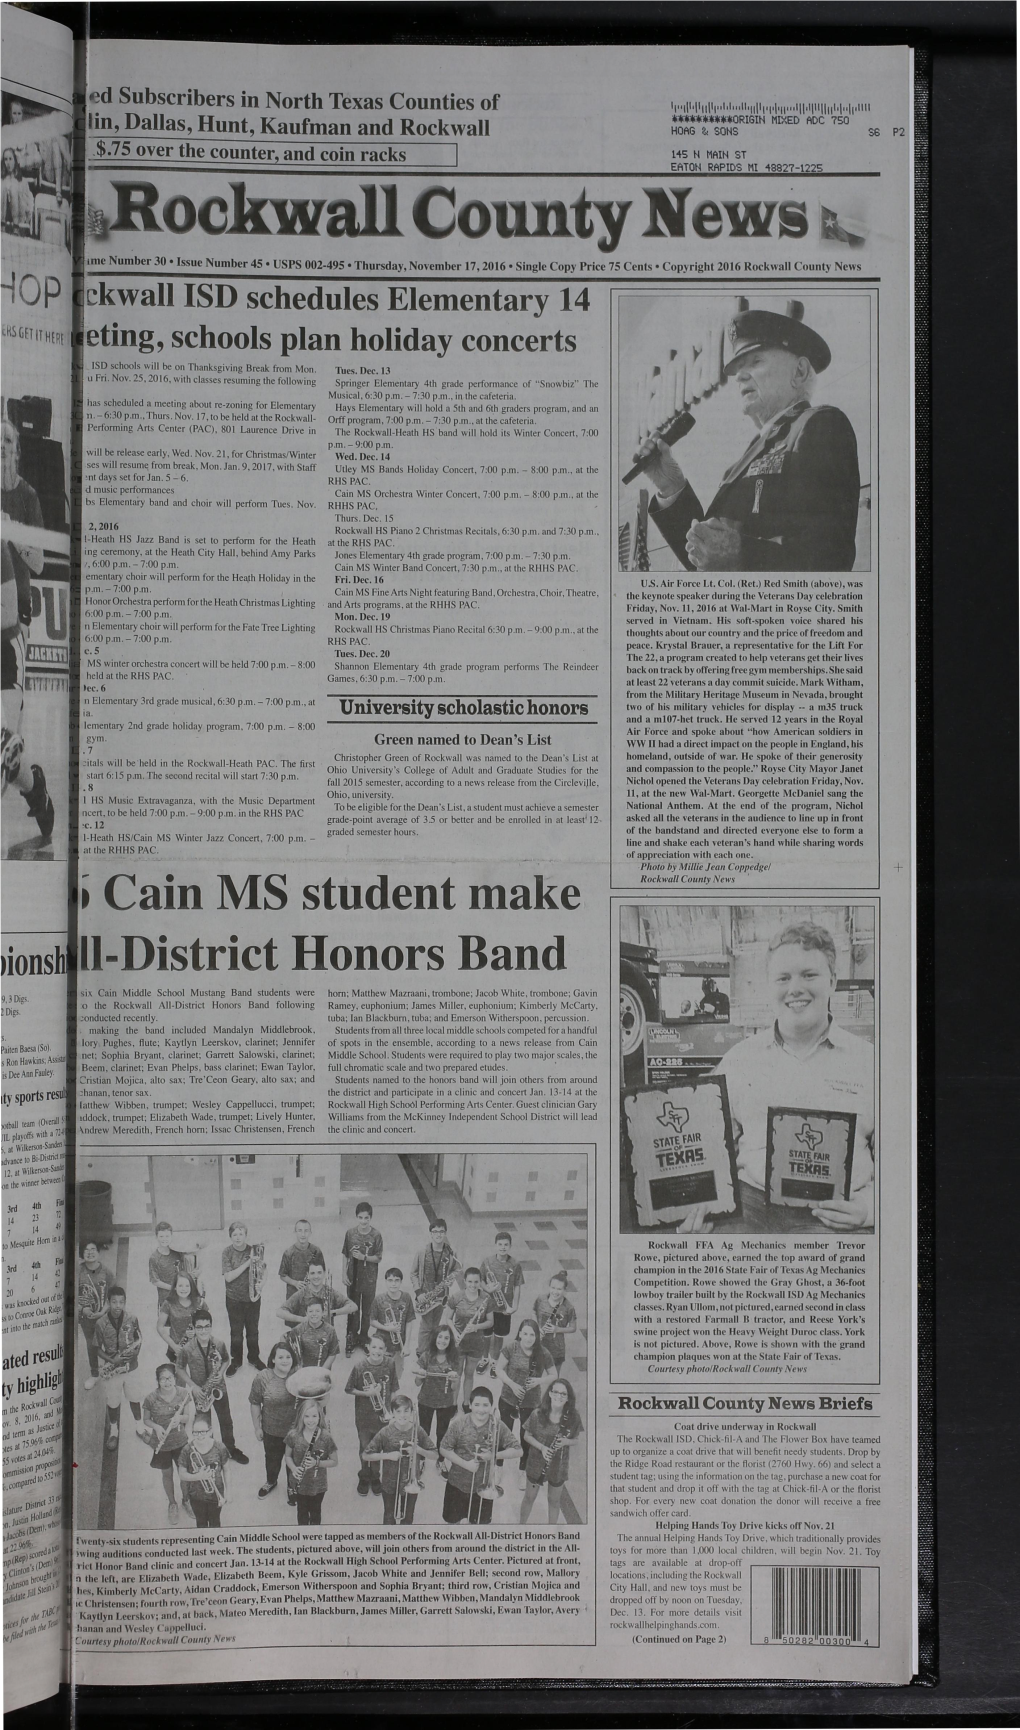 I Cain MS Student Make 11-District Honors Band